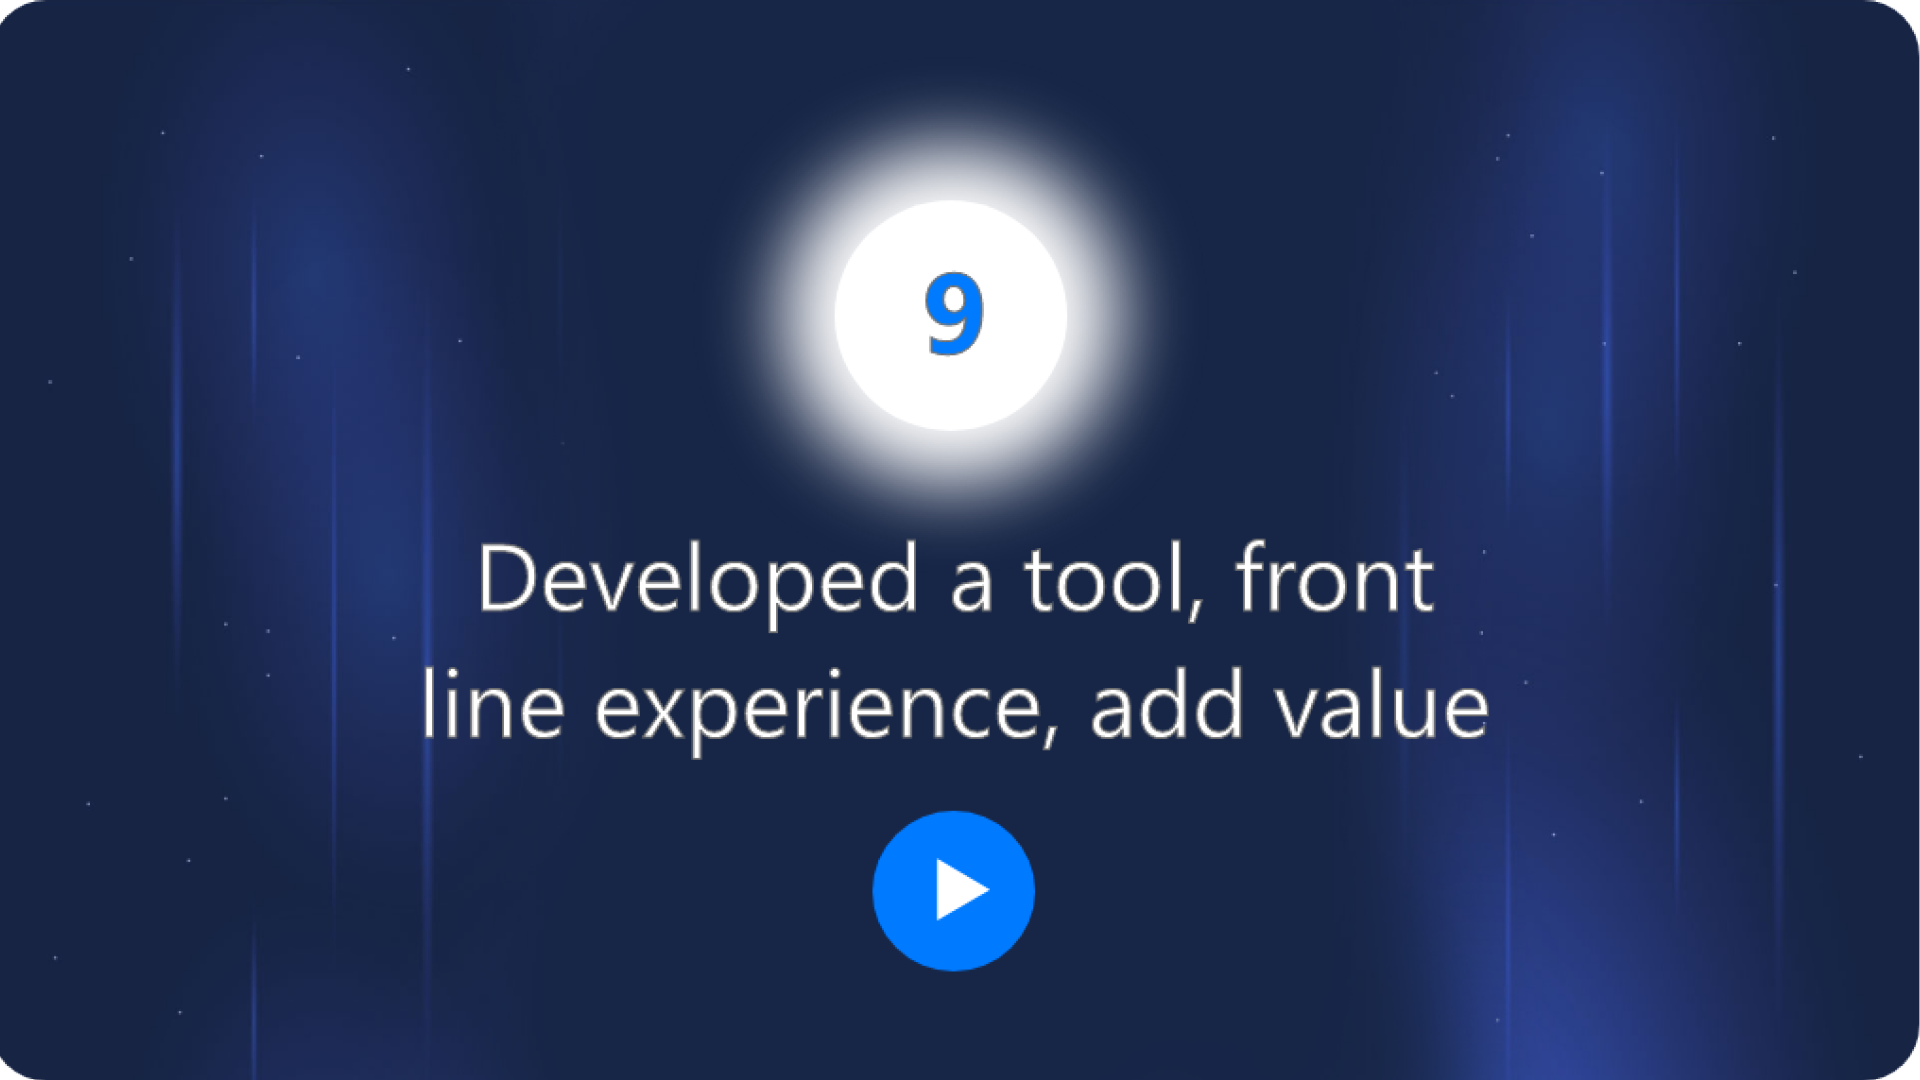 Developed a tool, front line experience, add value